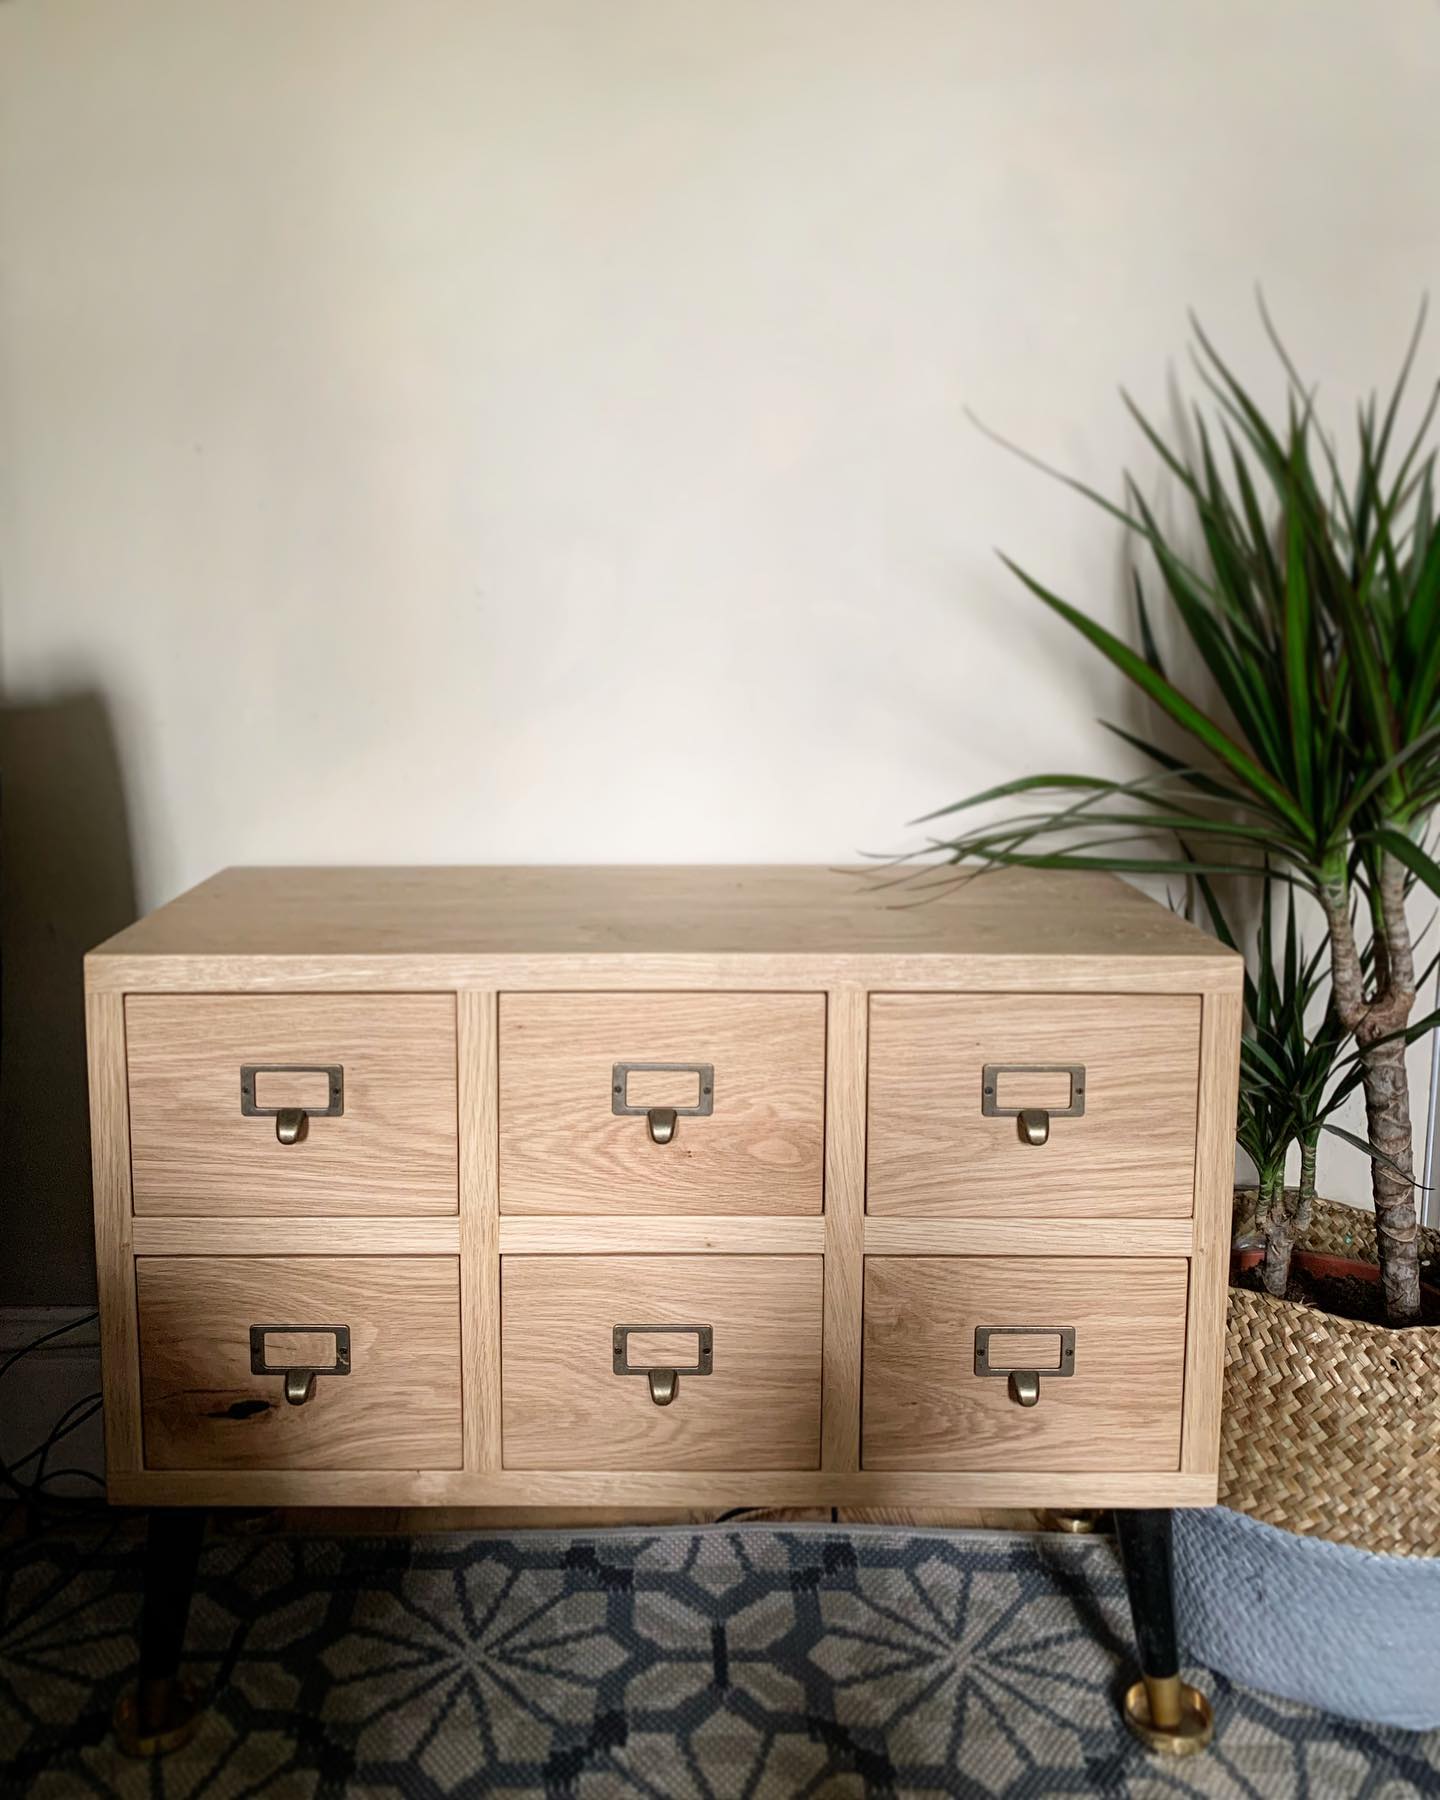 We wanted to share something we made for ourselves through lockdown  it’s so useful for all my tools! The angled legs came from an old cabinet we then wall mounted, they work perfectly! ..#whatatreat #ourhouse #homedecor #usefulandbeautiful #oak #handmade #apothecary #cabinet #sidetable #storagesolutions #interiordesigninspo #home